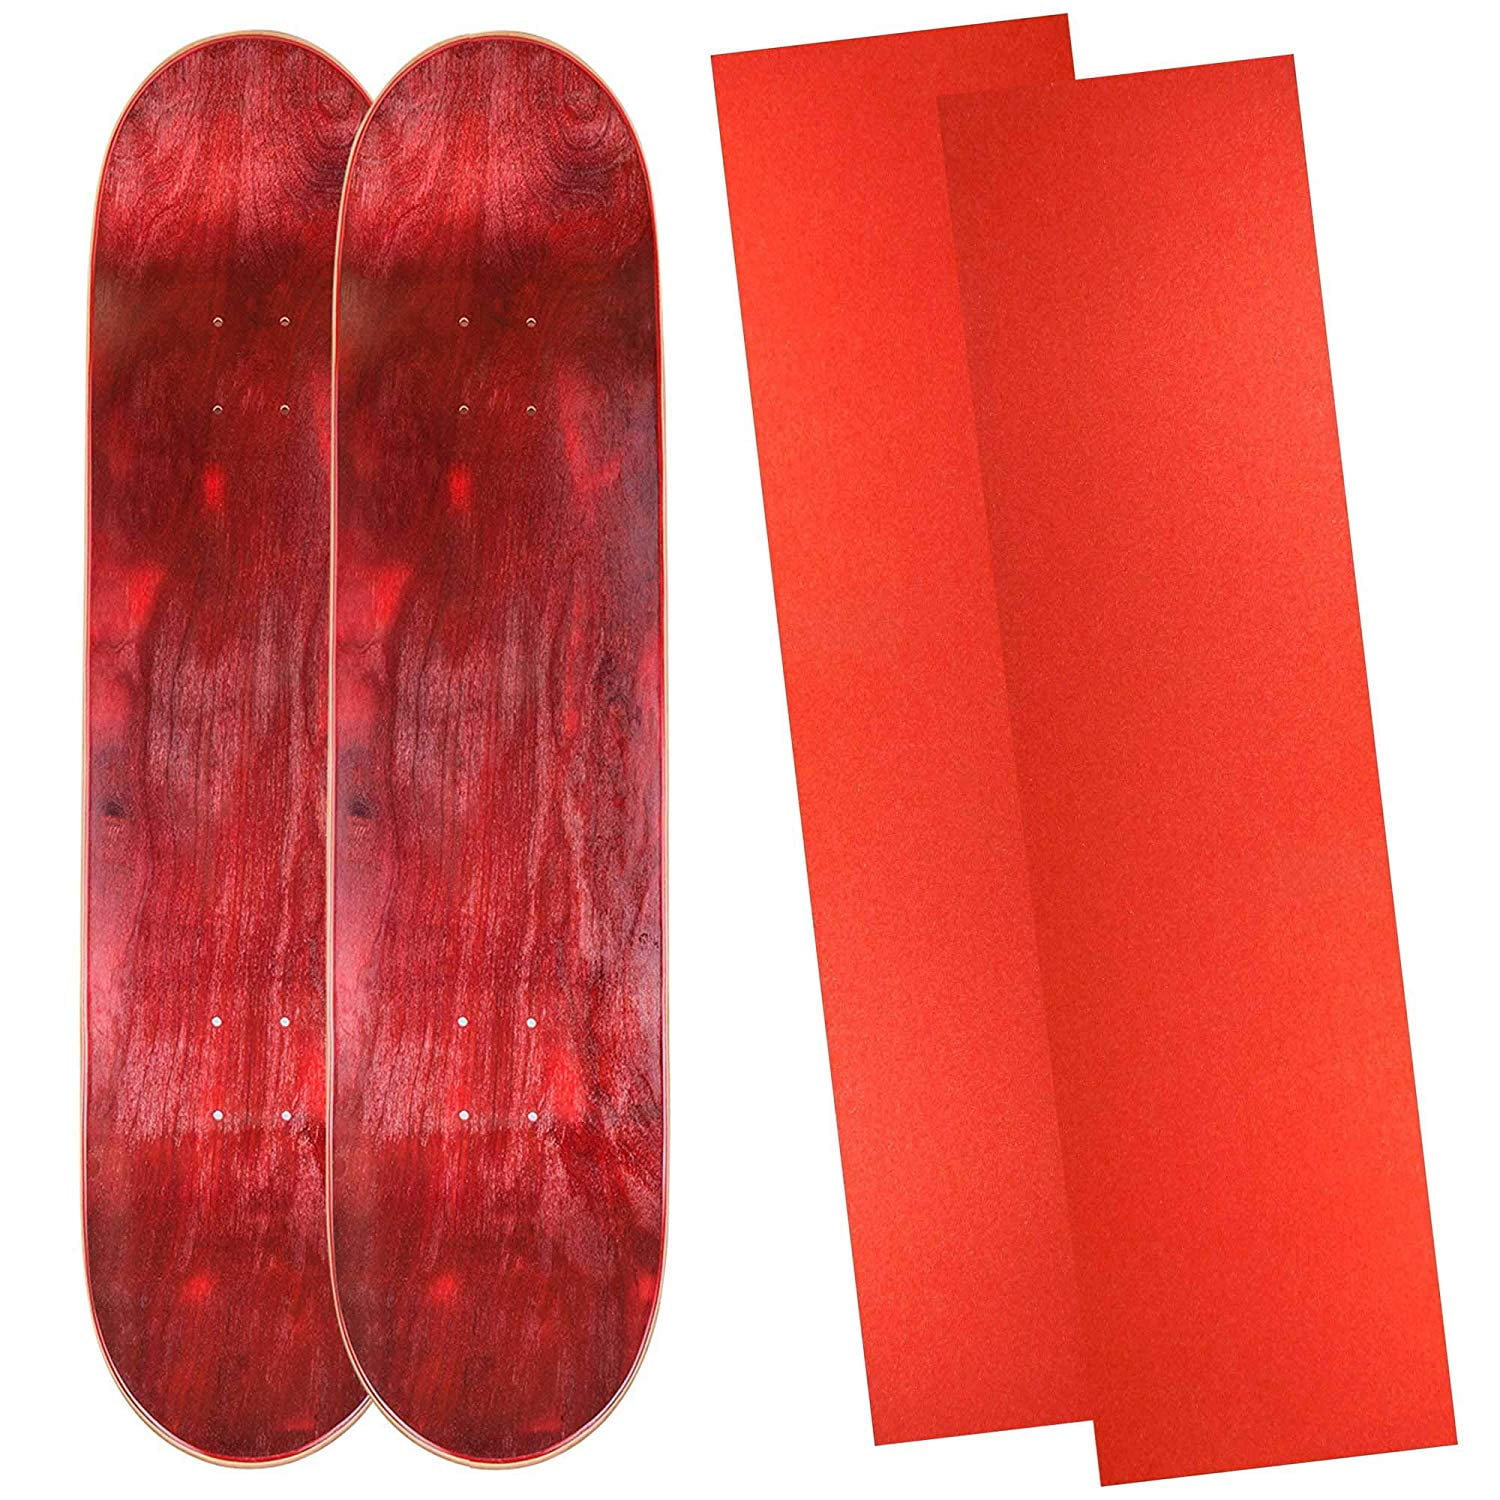 Cal 7 Blank Maple Skateboard Deck 8.25" with Mob Grip Tape Multi-Colors Set